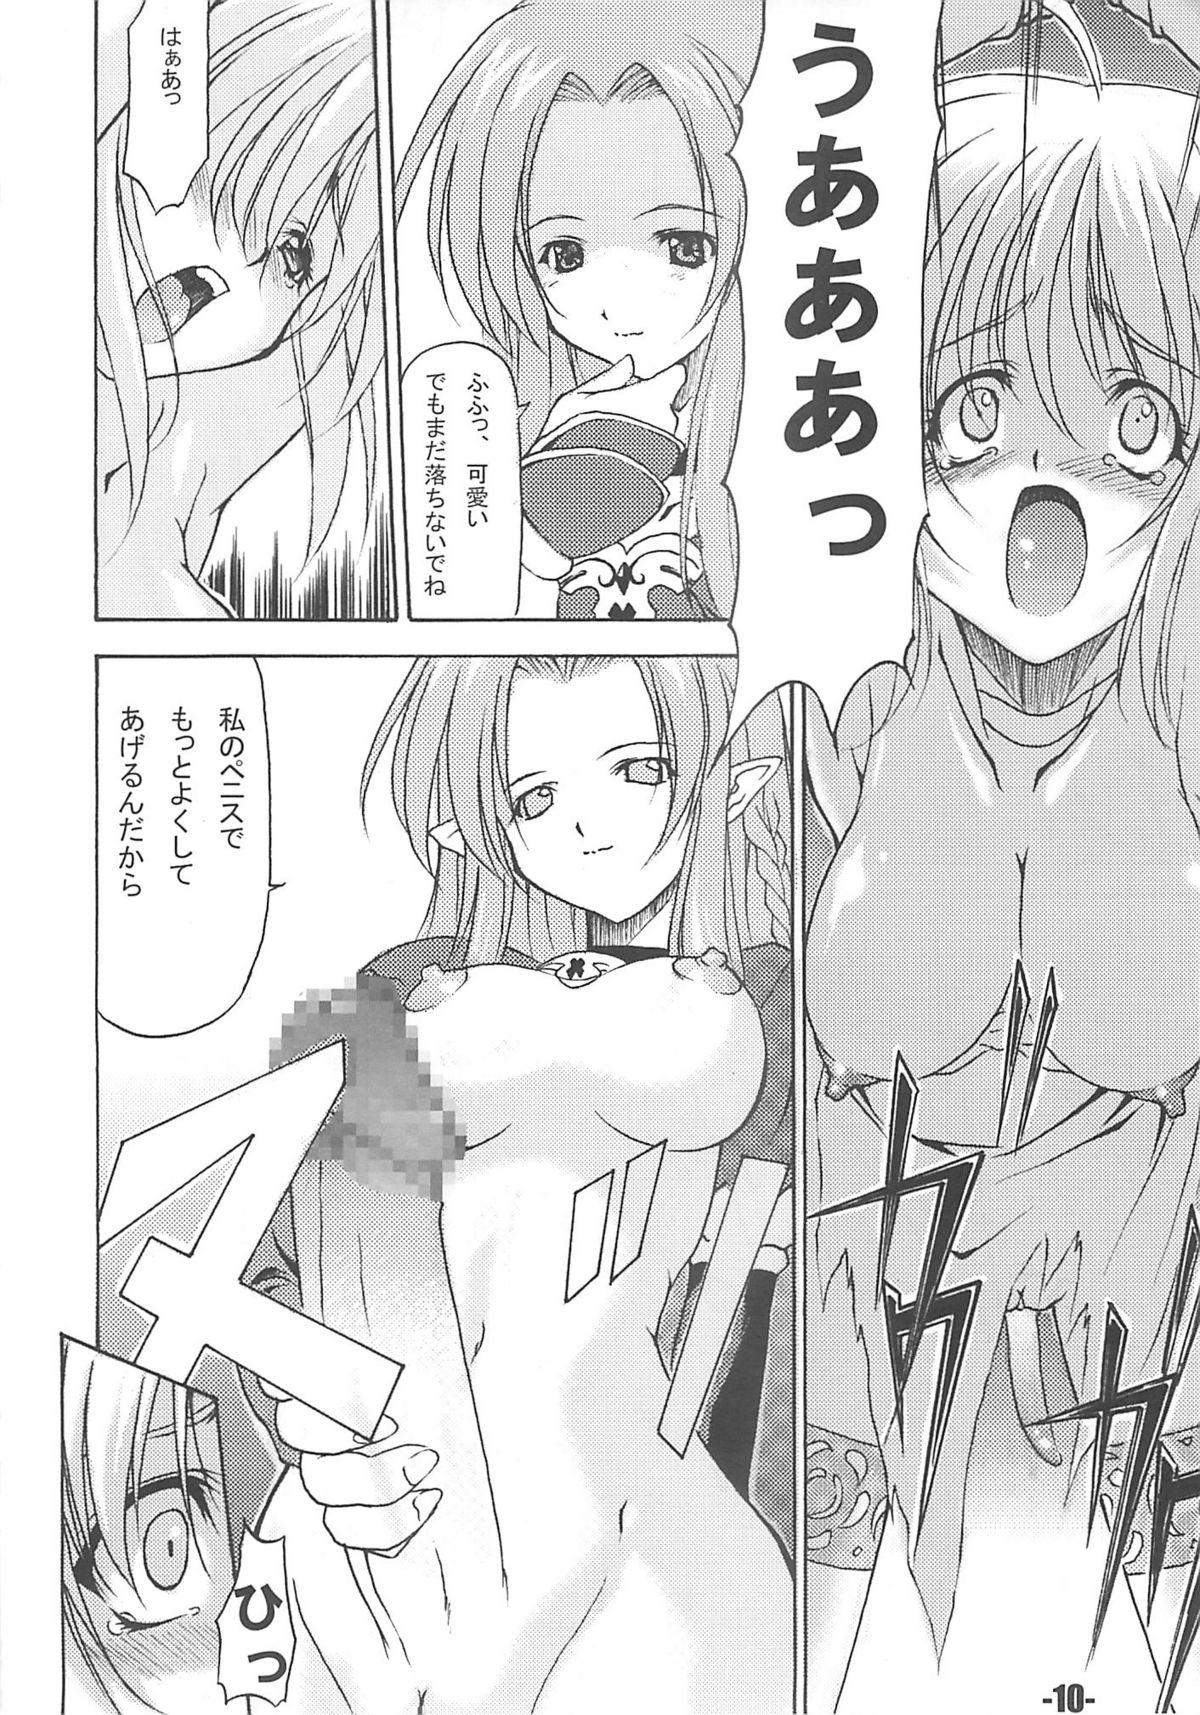 Caseiro EXtra stage vol. 13 - Fate stay night Gay Blondhair - Page 9